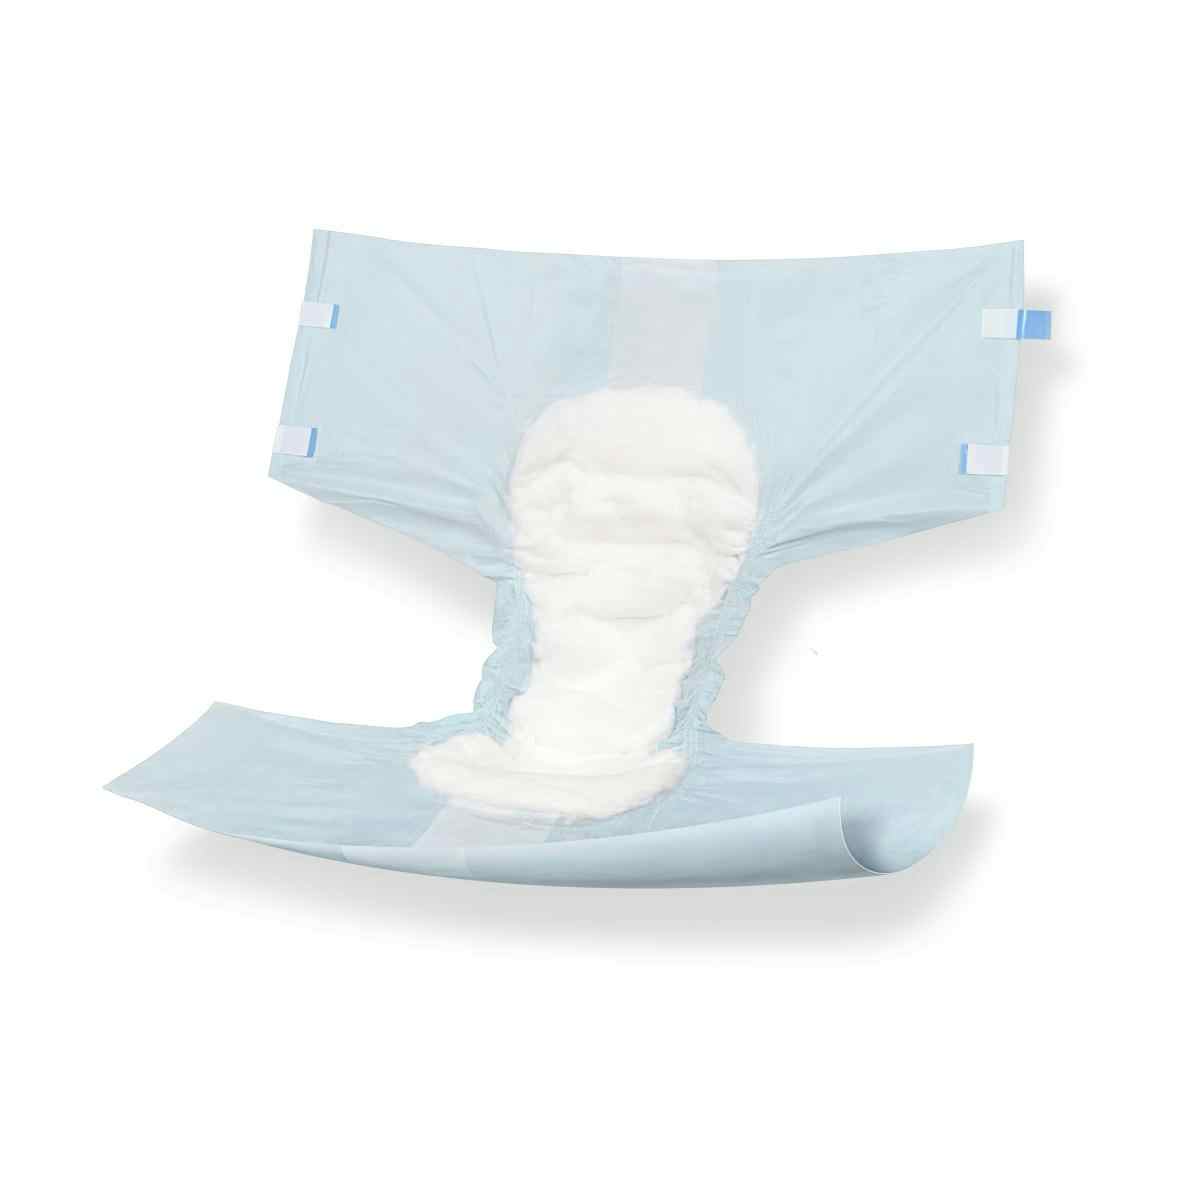 Medline Protection Plus Contoured Adult Briefs, Heavy Absorbency, MTB30500, L (45"-58") - Case of 72